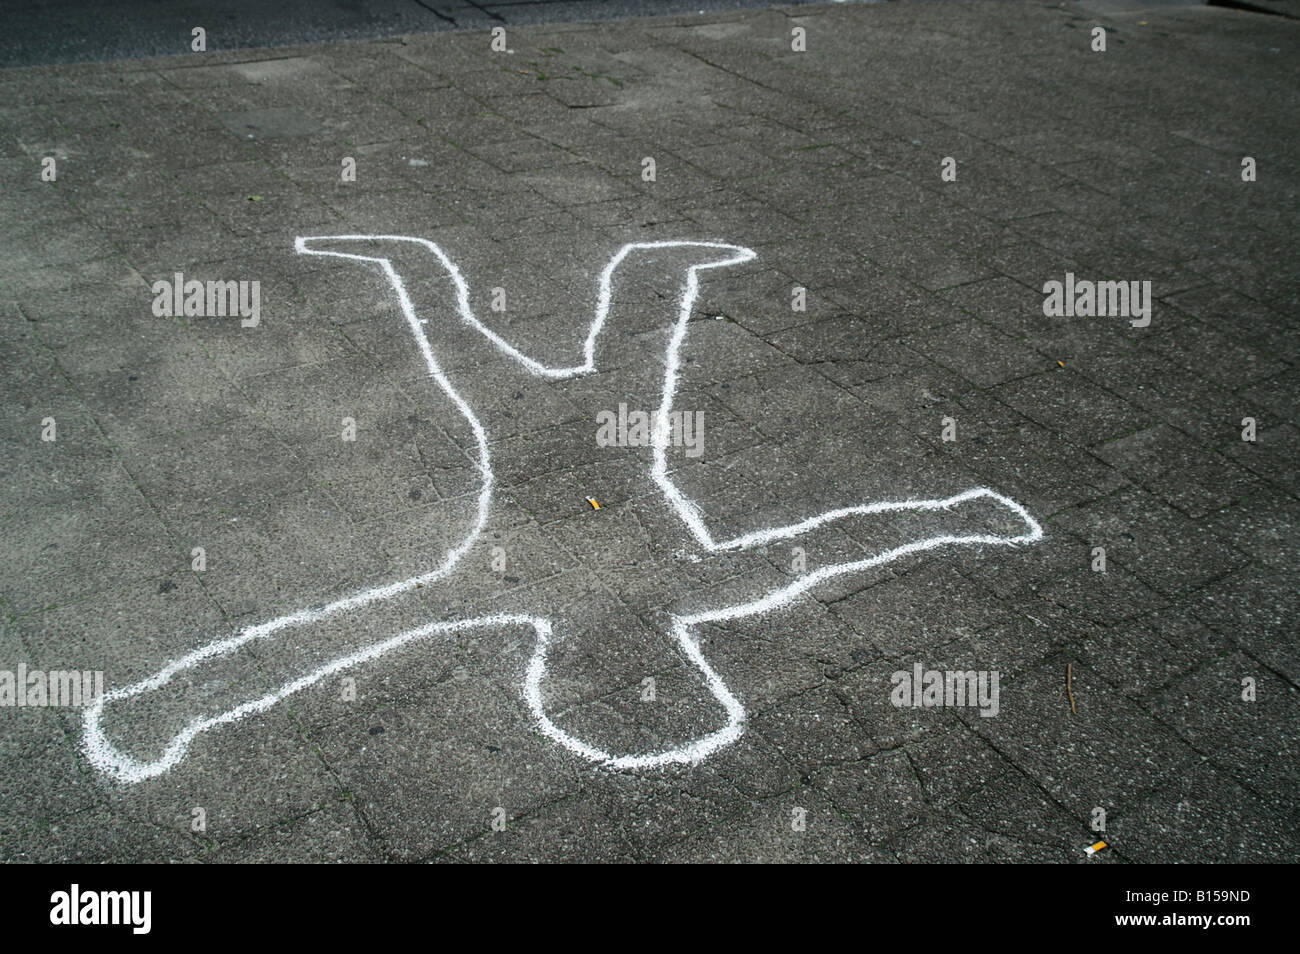 Chalk outline man figure body silhouette drawing fallen injury accident on pavement ground dead corpse Stock Photo